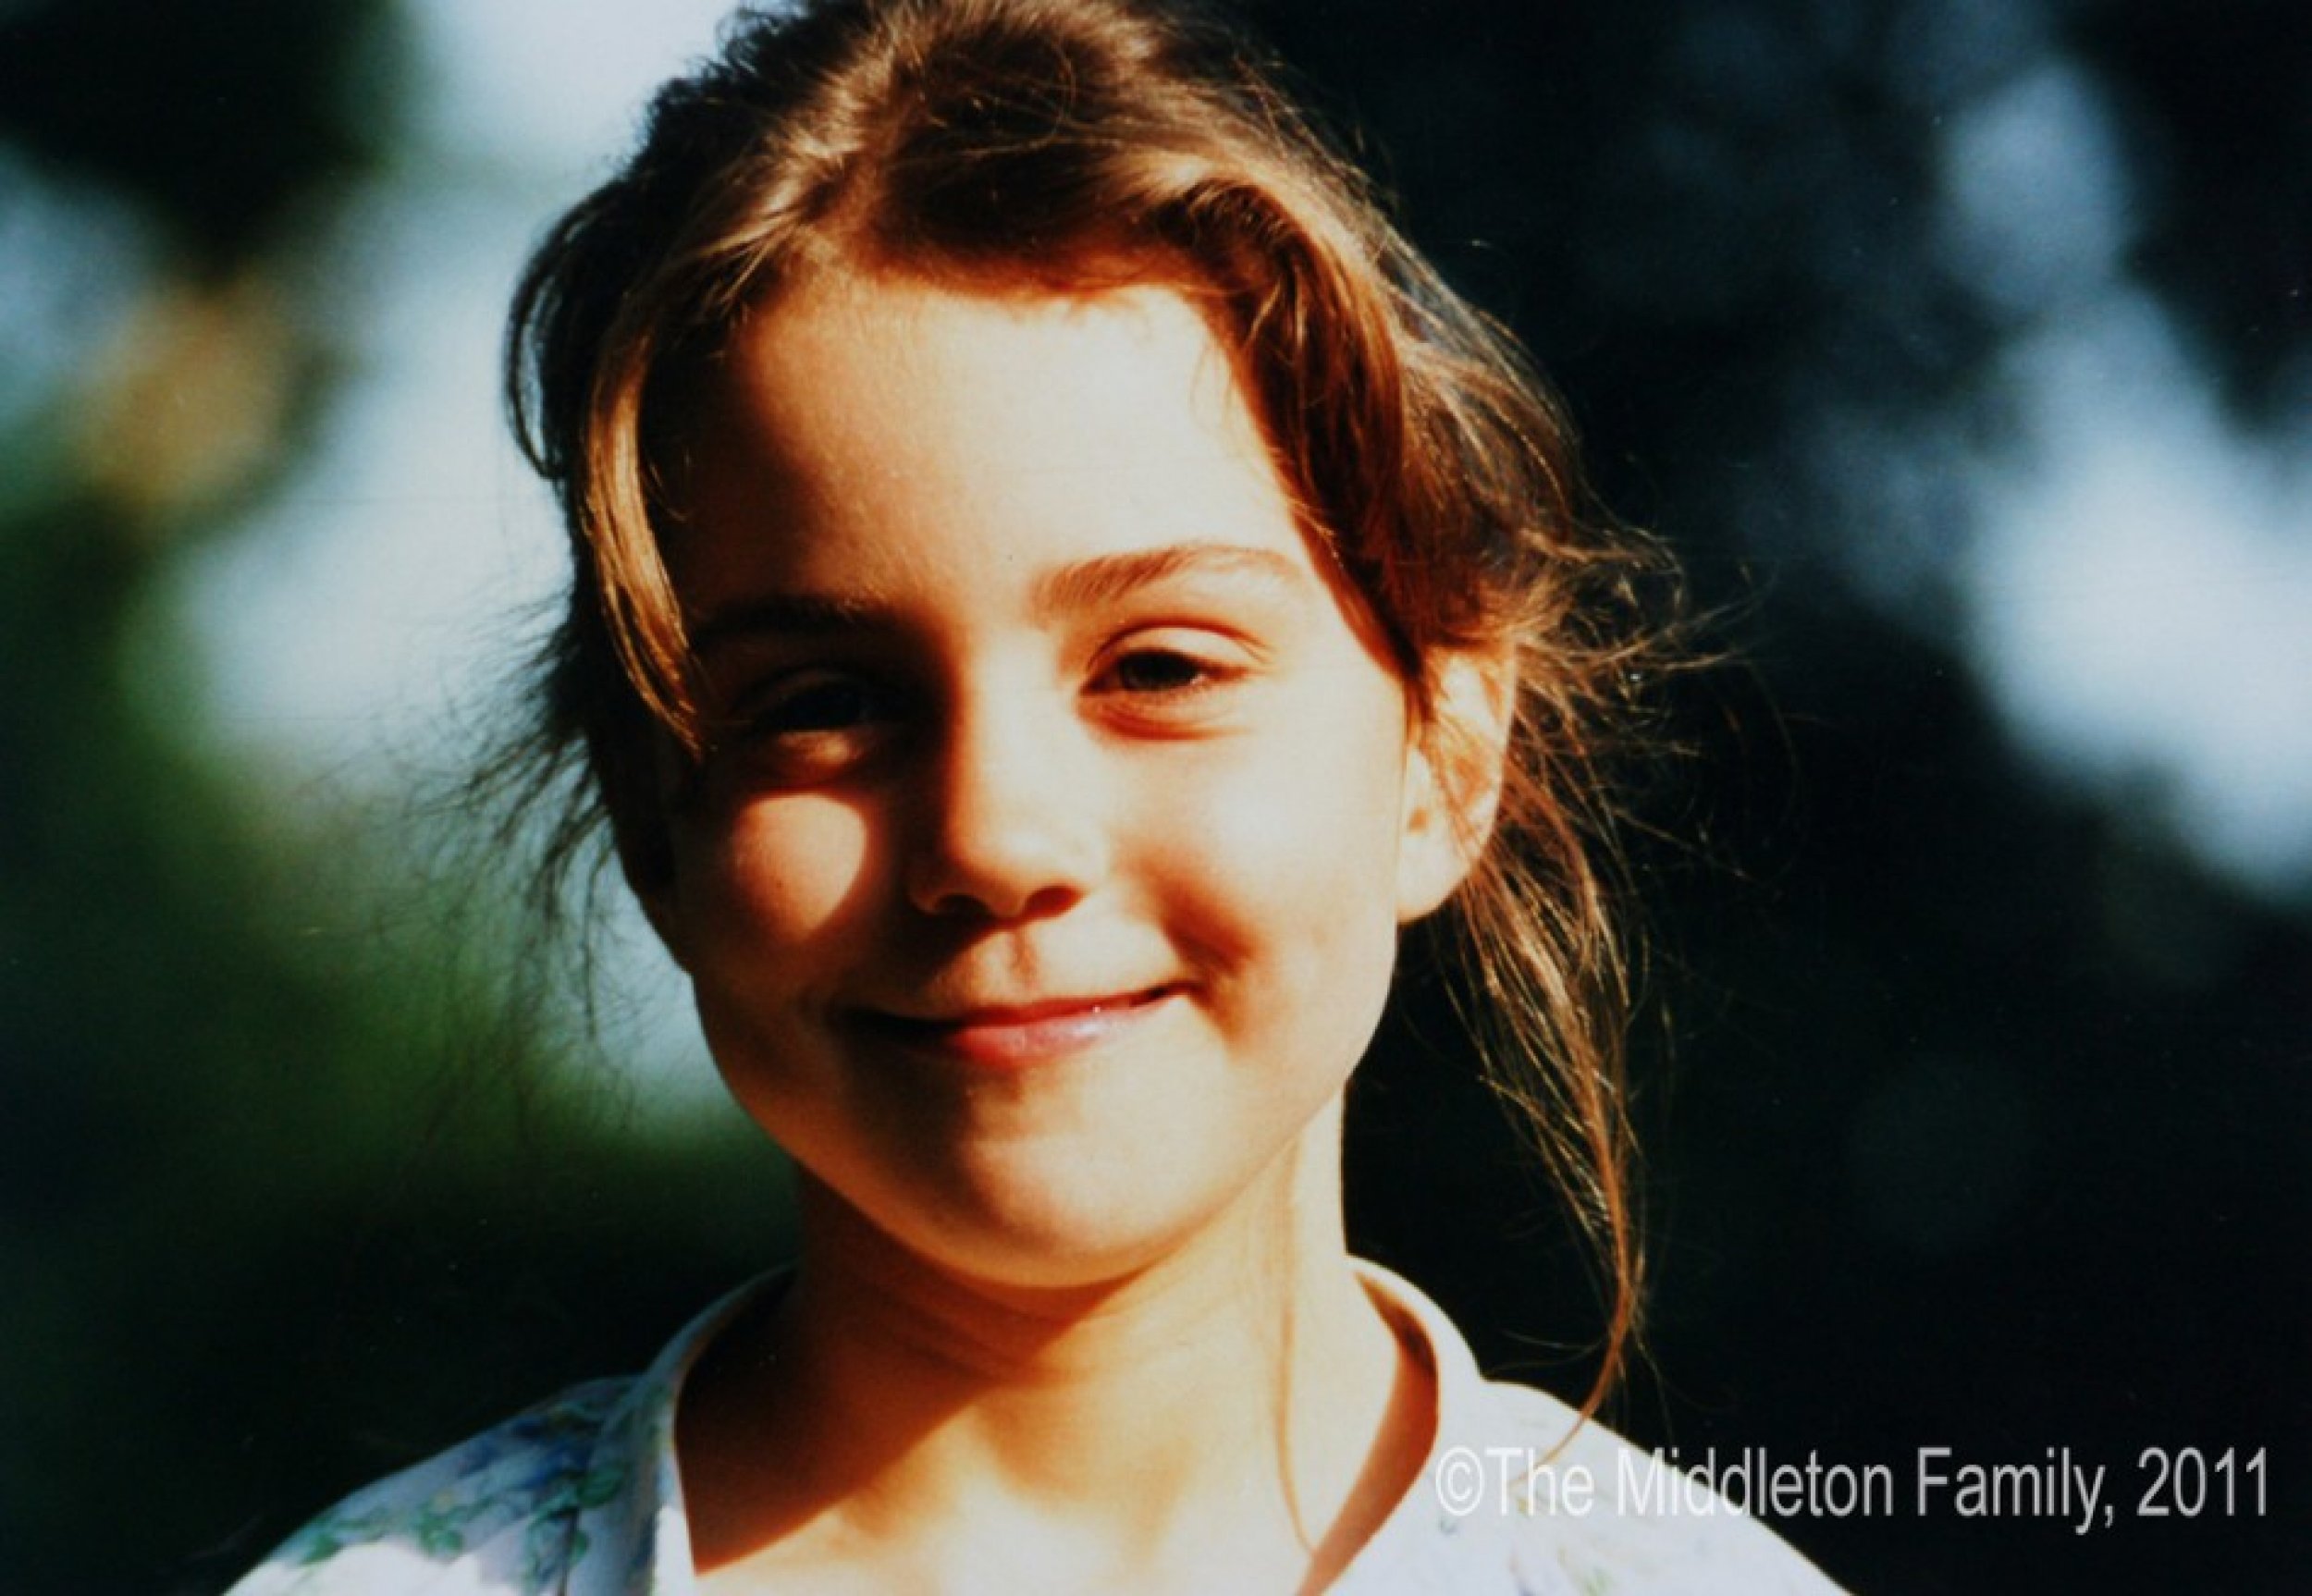 Kate Middleton Catherine, aged 5, in the UK.